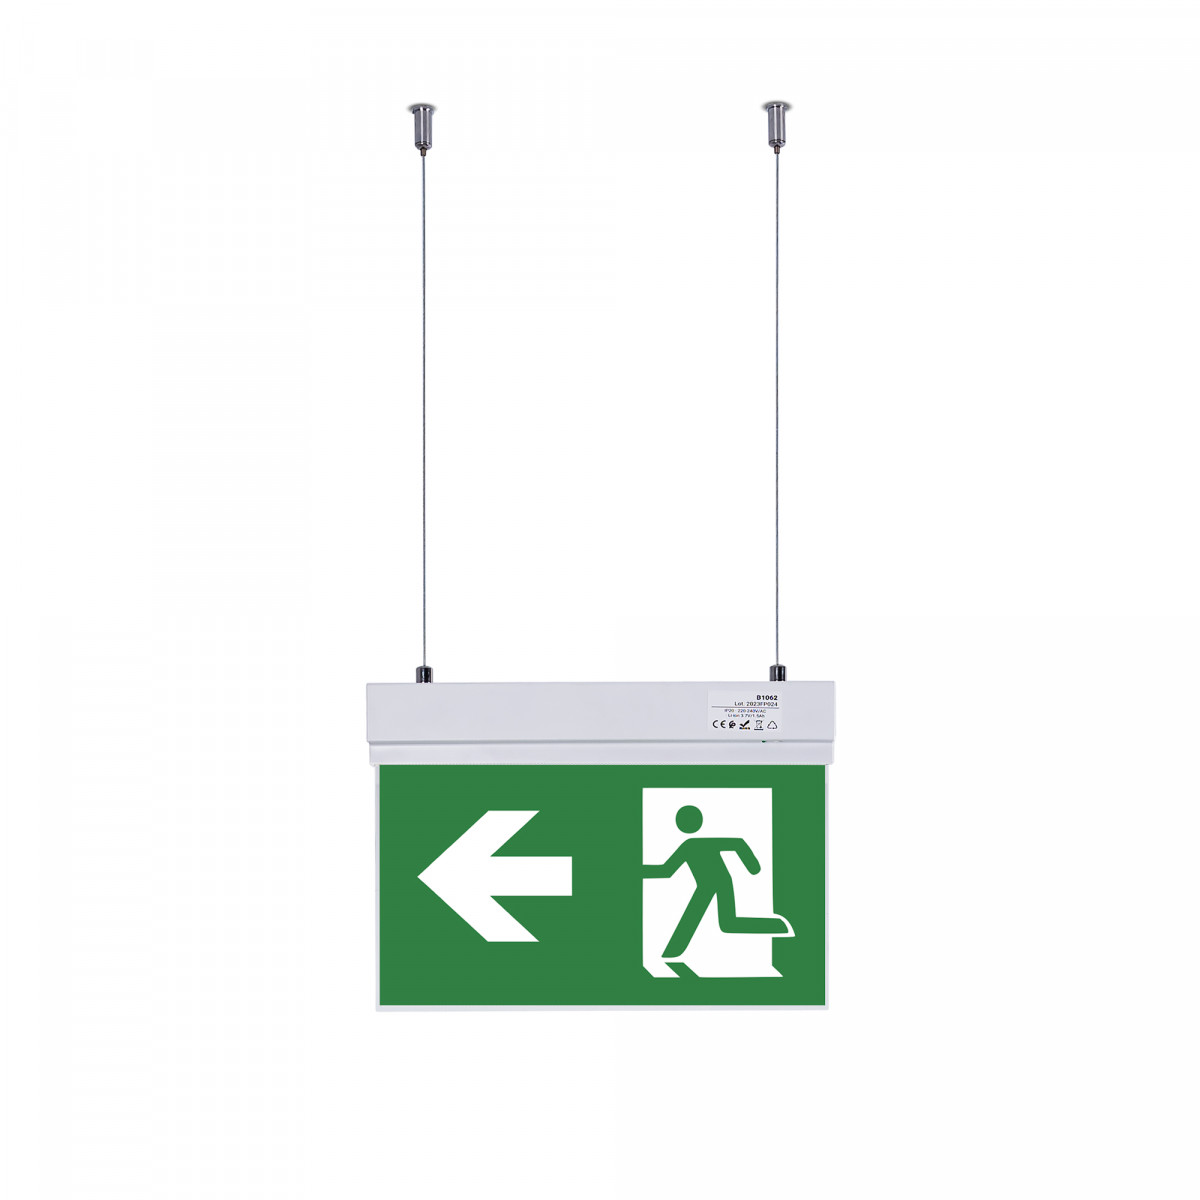 Hanging permanent emergency light with "Side arrow" pictogram